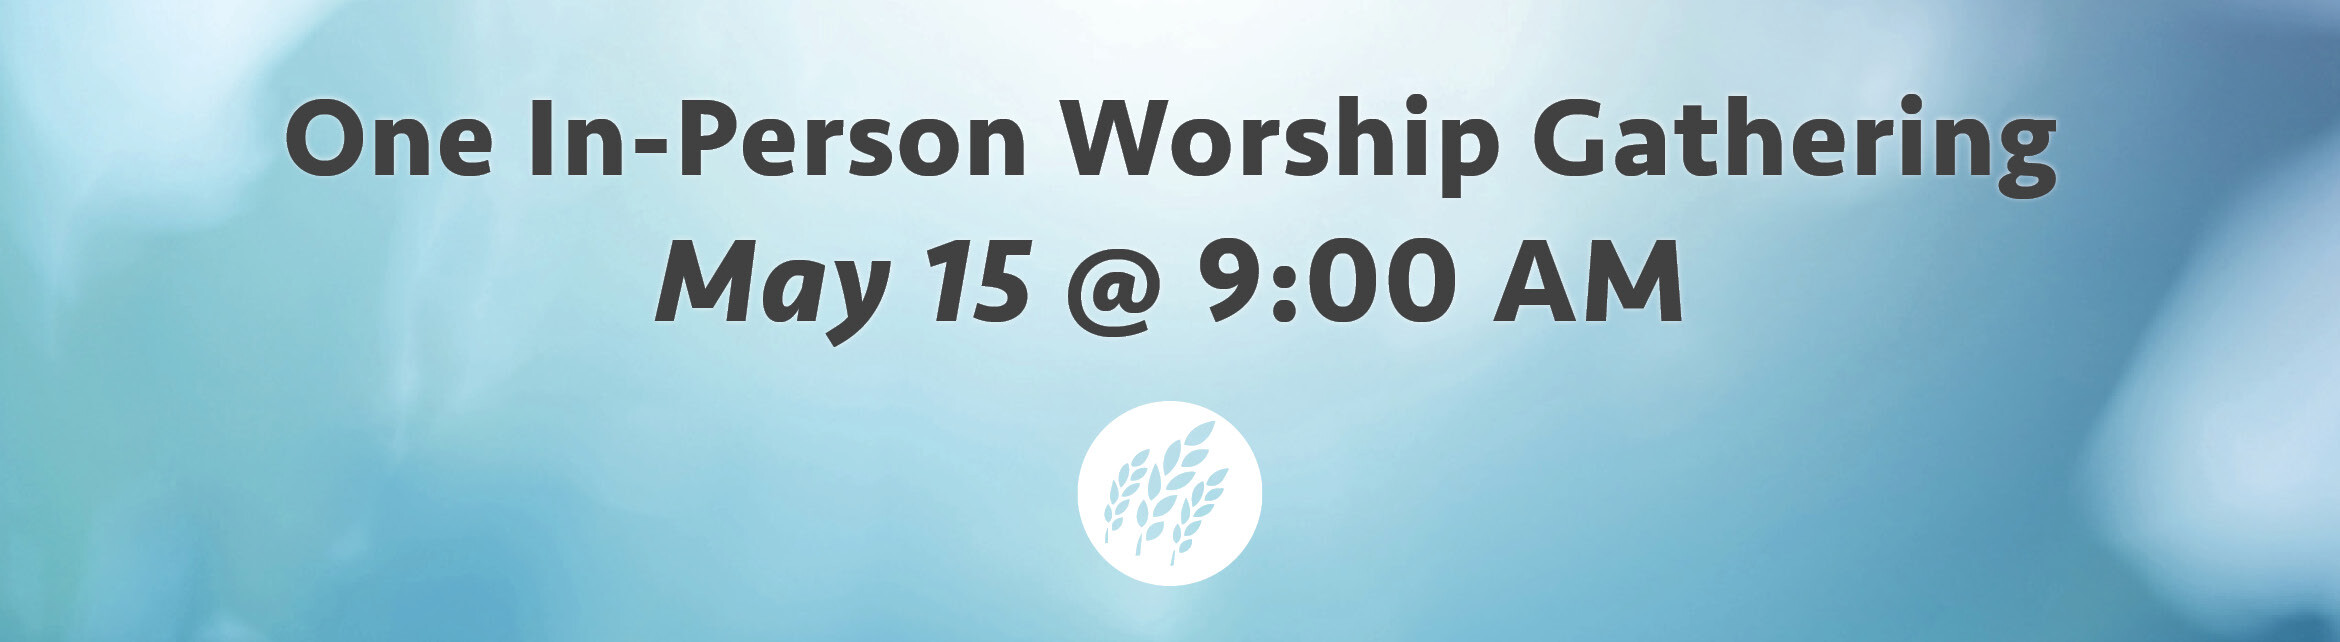 May 15 One Worship Service